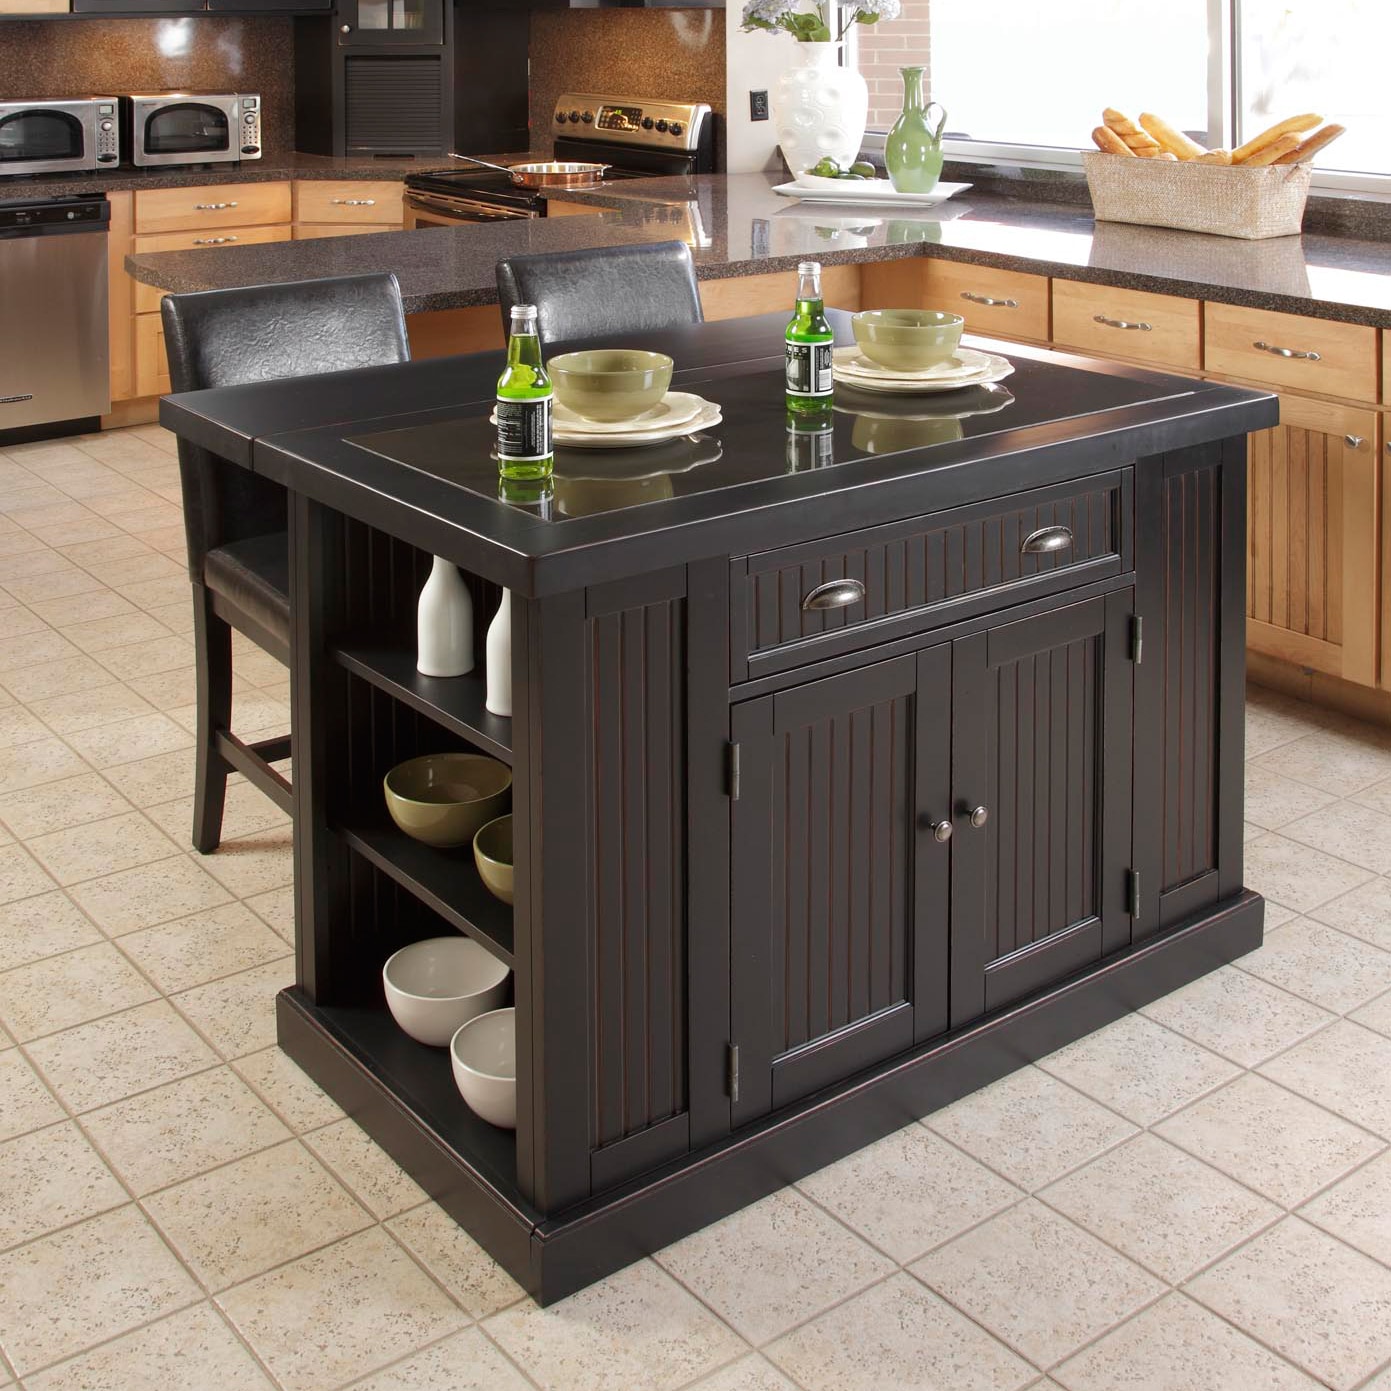   finish kitchen island with two bar stools today $ 1134 99 